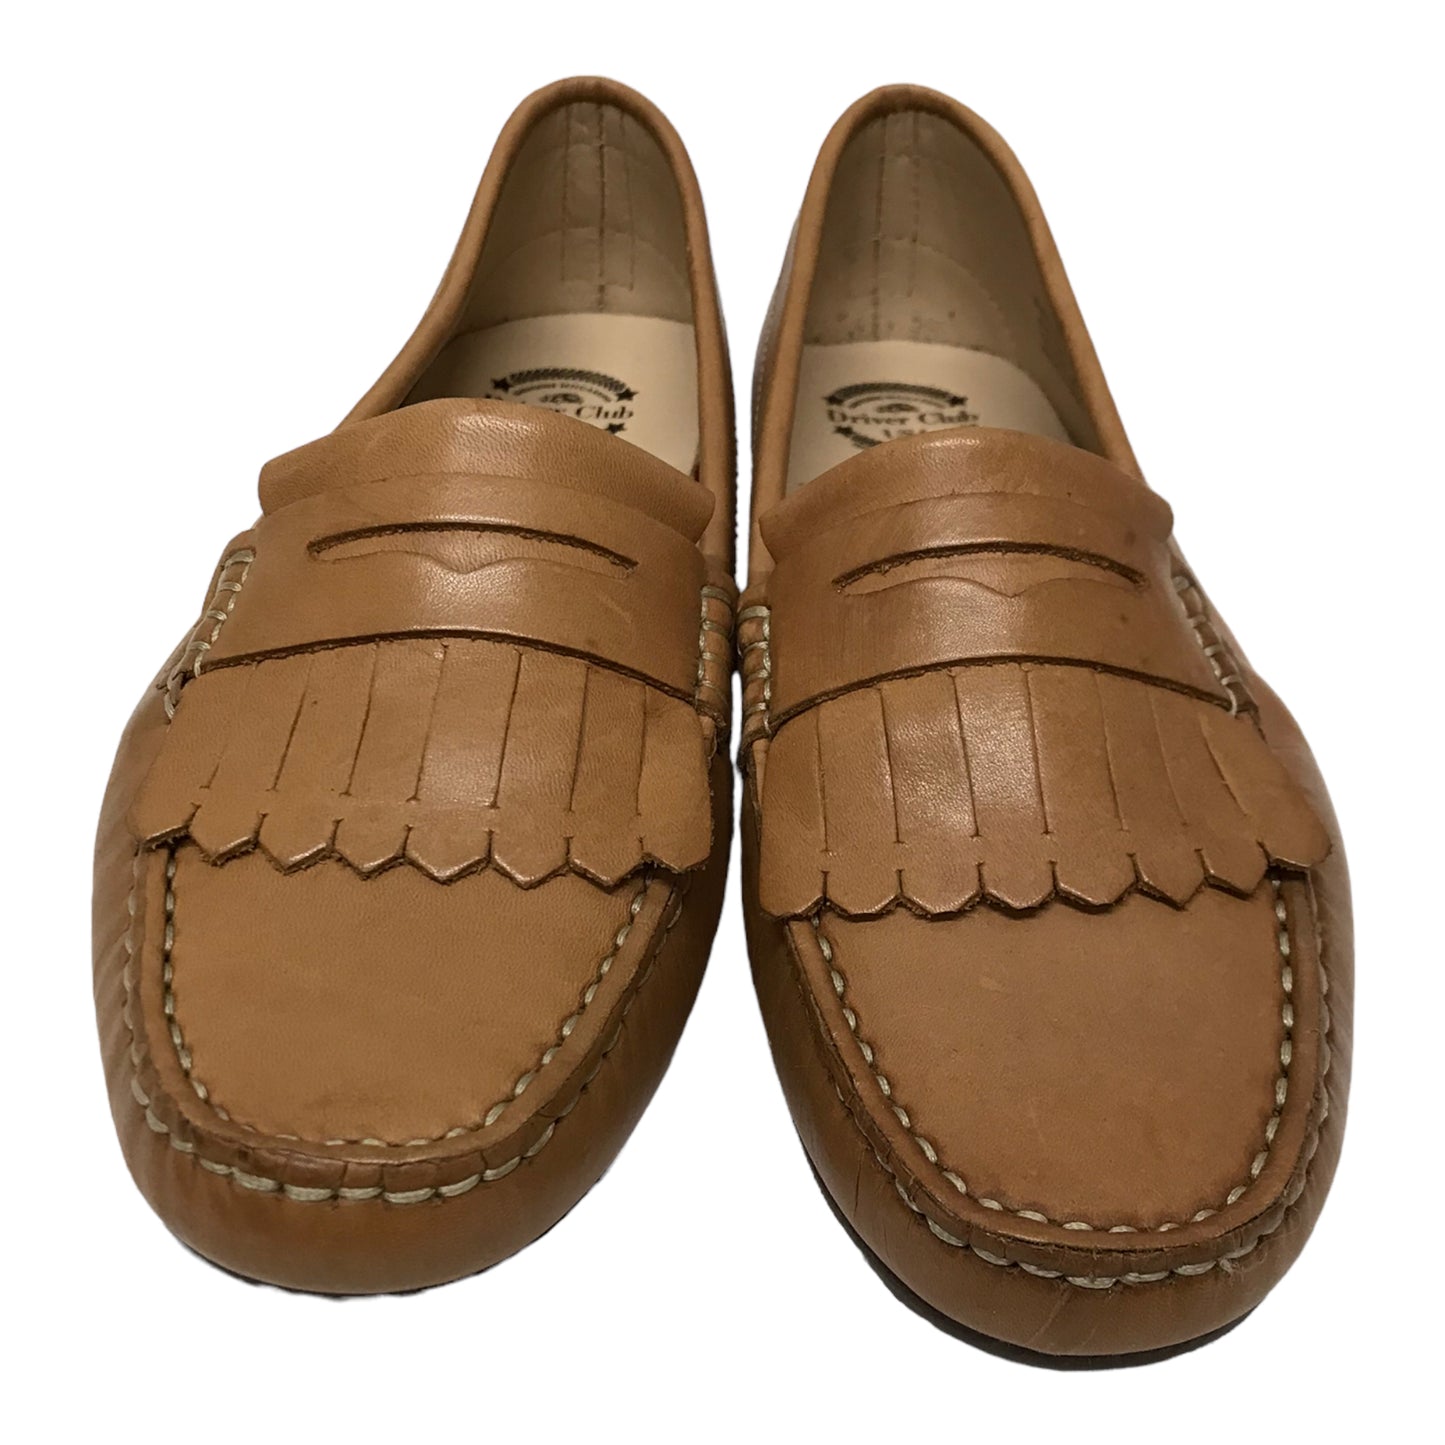 Shoes Flats Loafer Oxford By drivers club loafers Size: 10.5